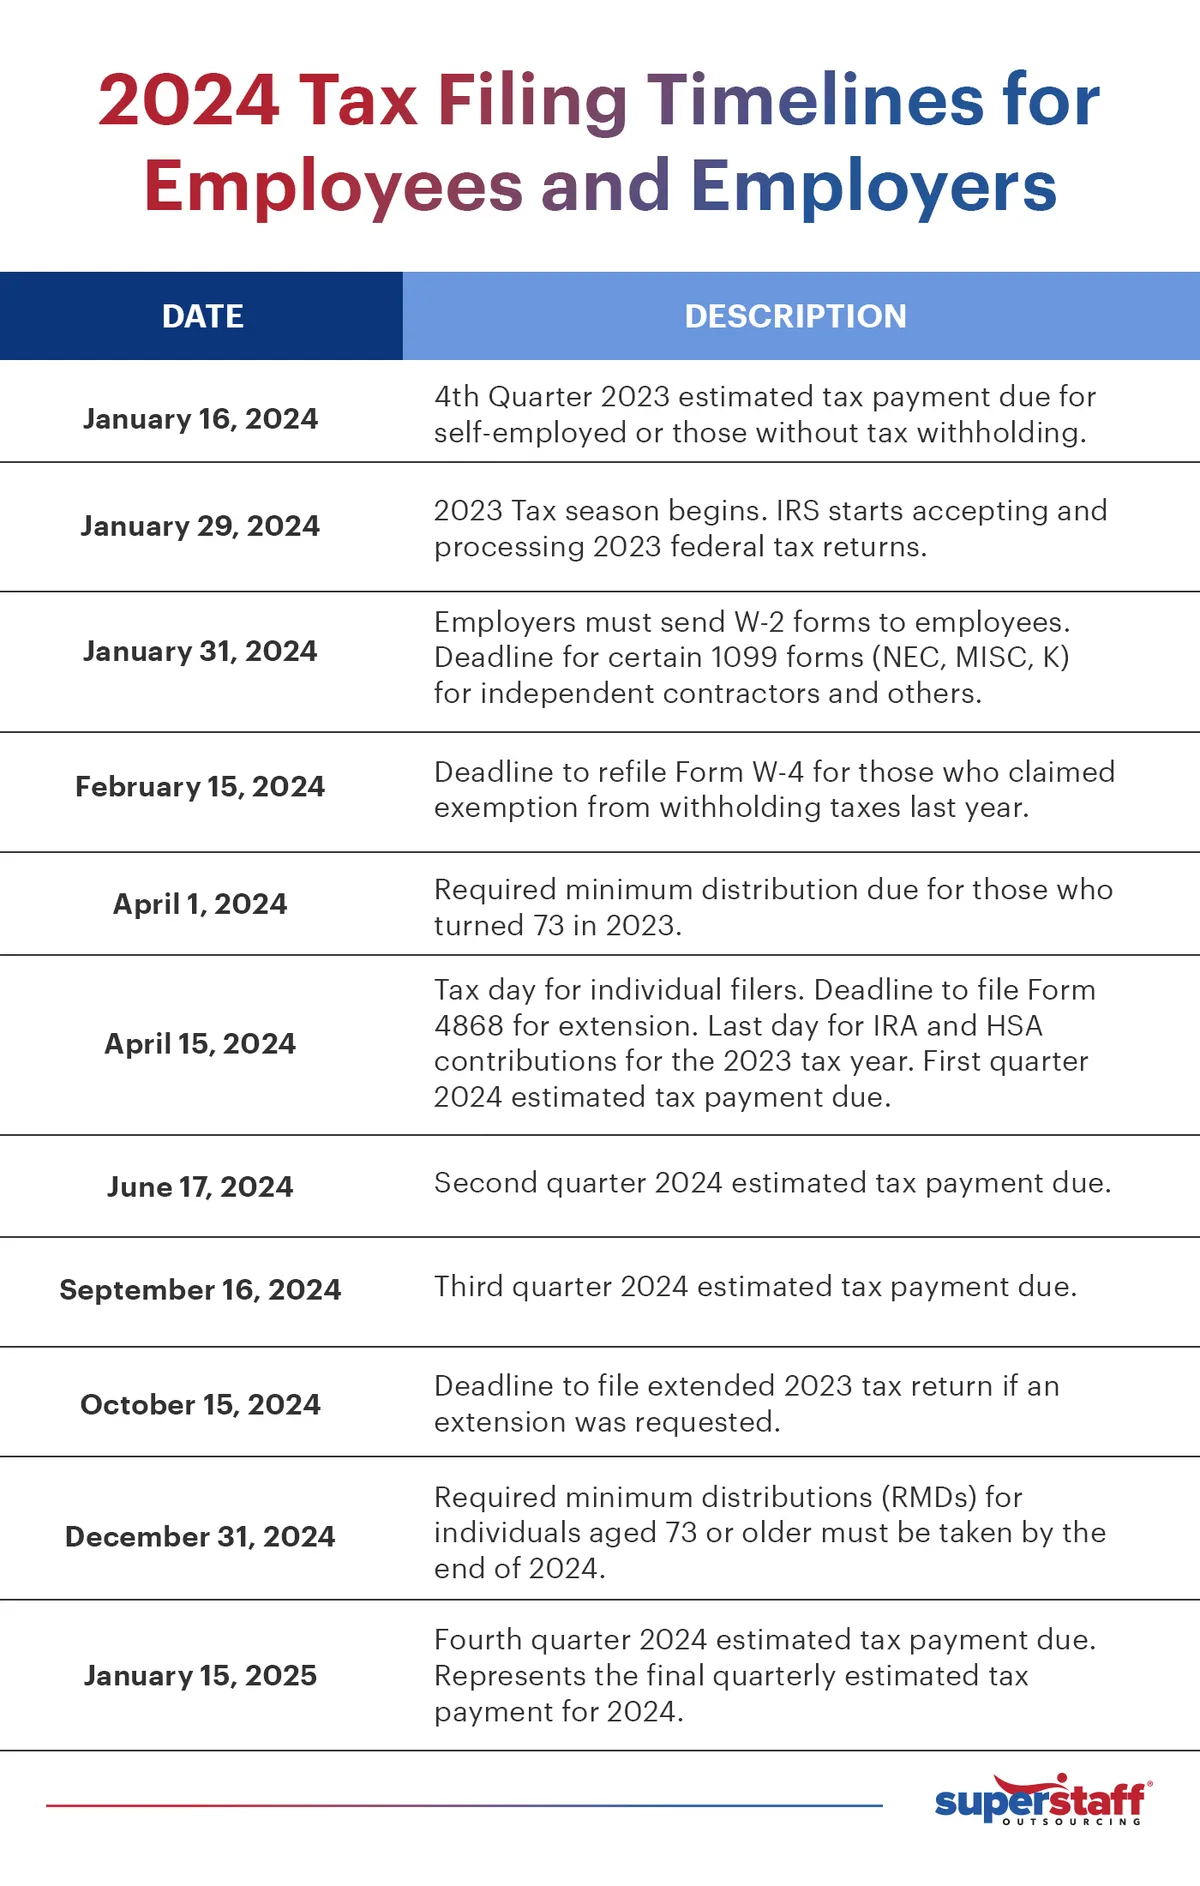 A mini infographic shows different filing deadlines for individuals for this tax season 2024.